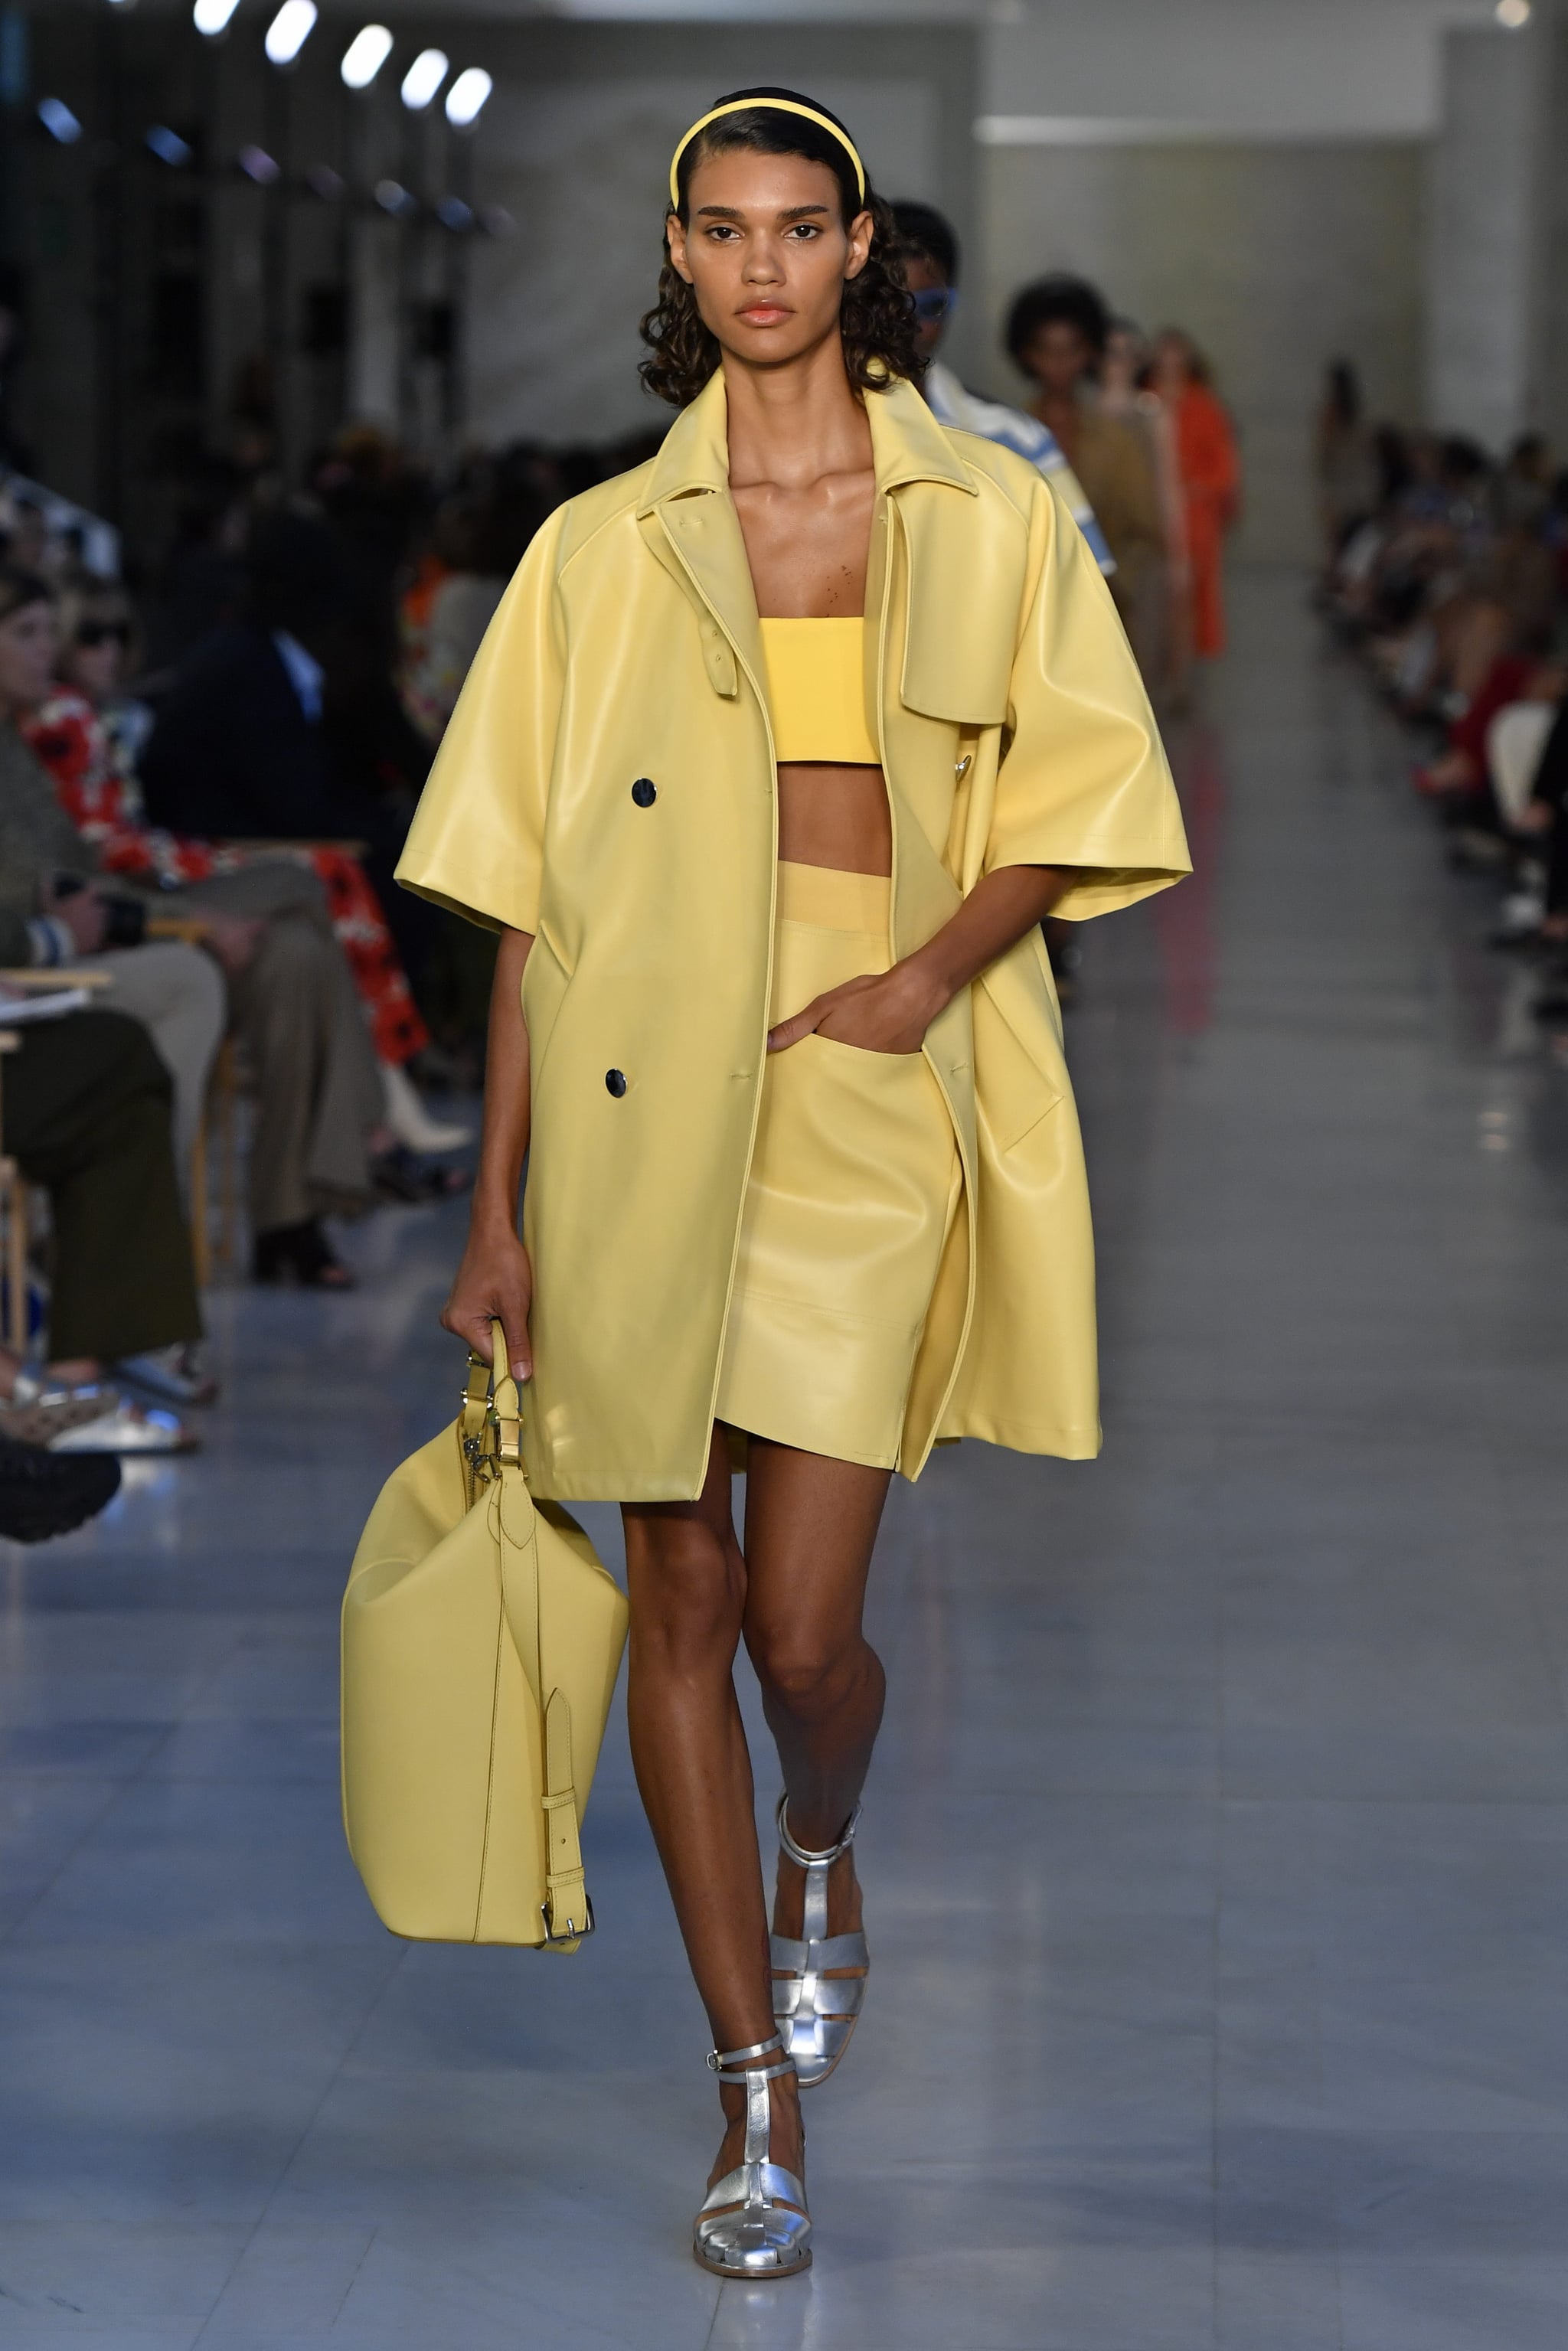 Spring 2022 Bag Trends Straight From the Runways